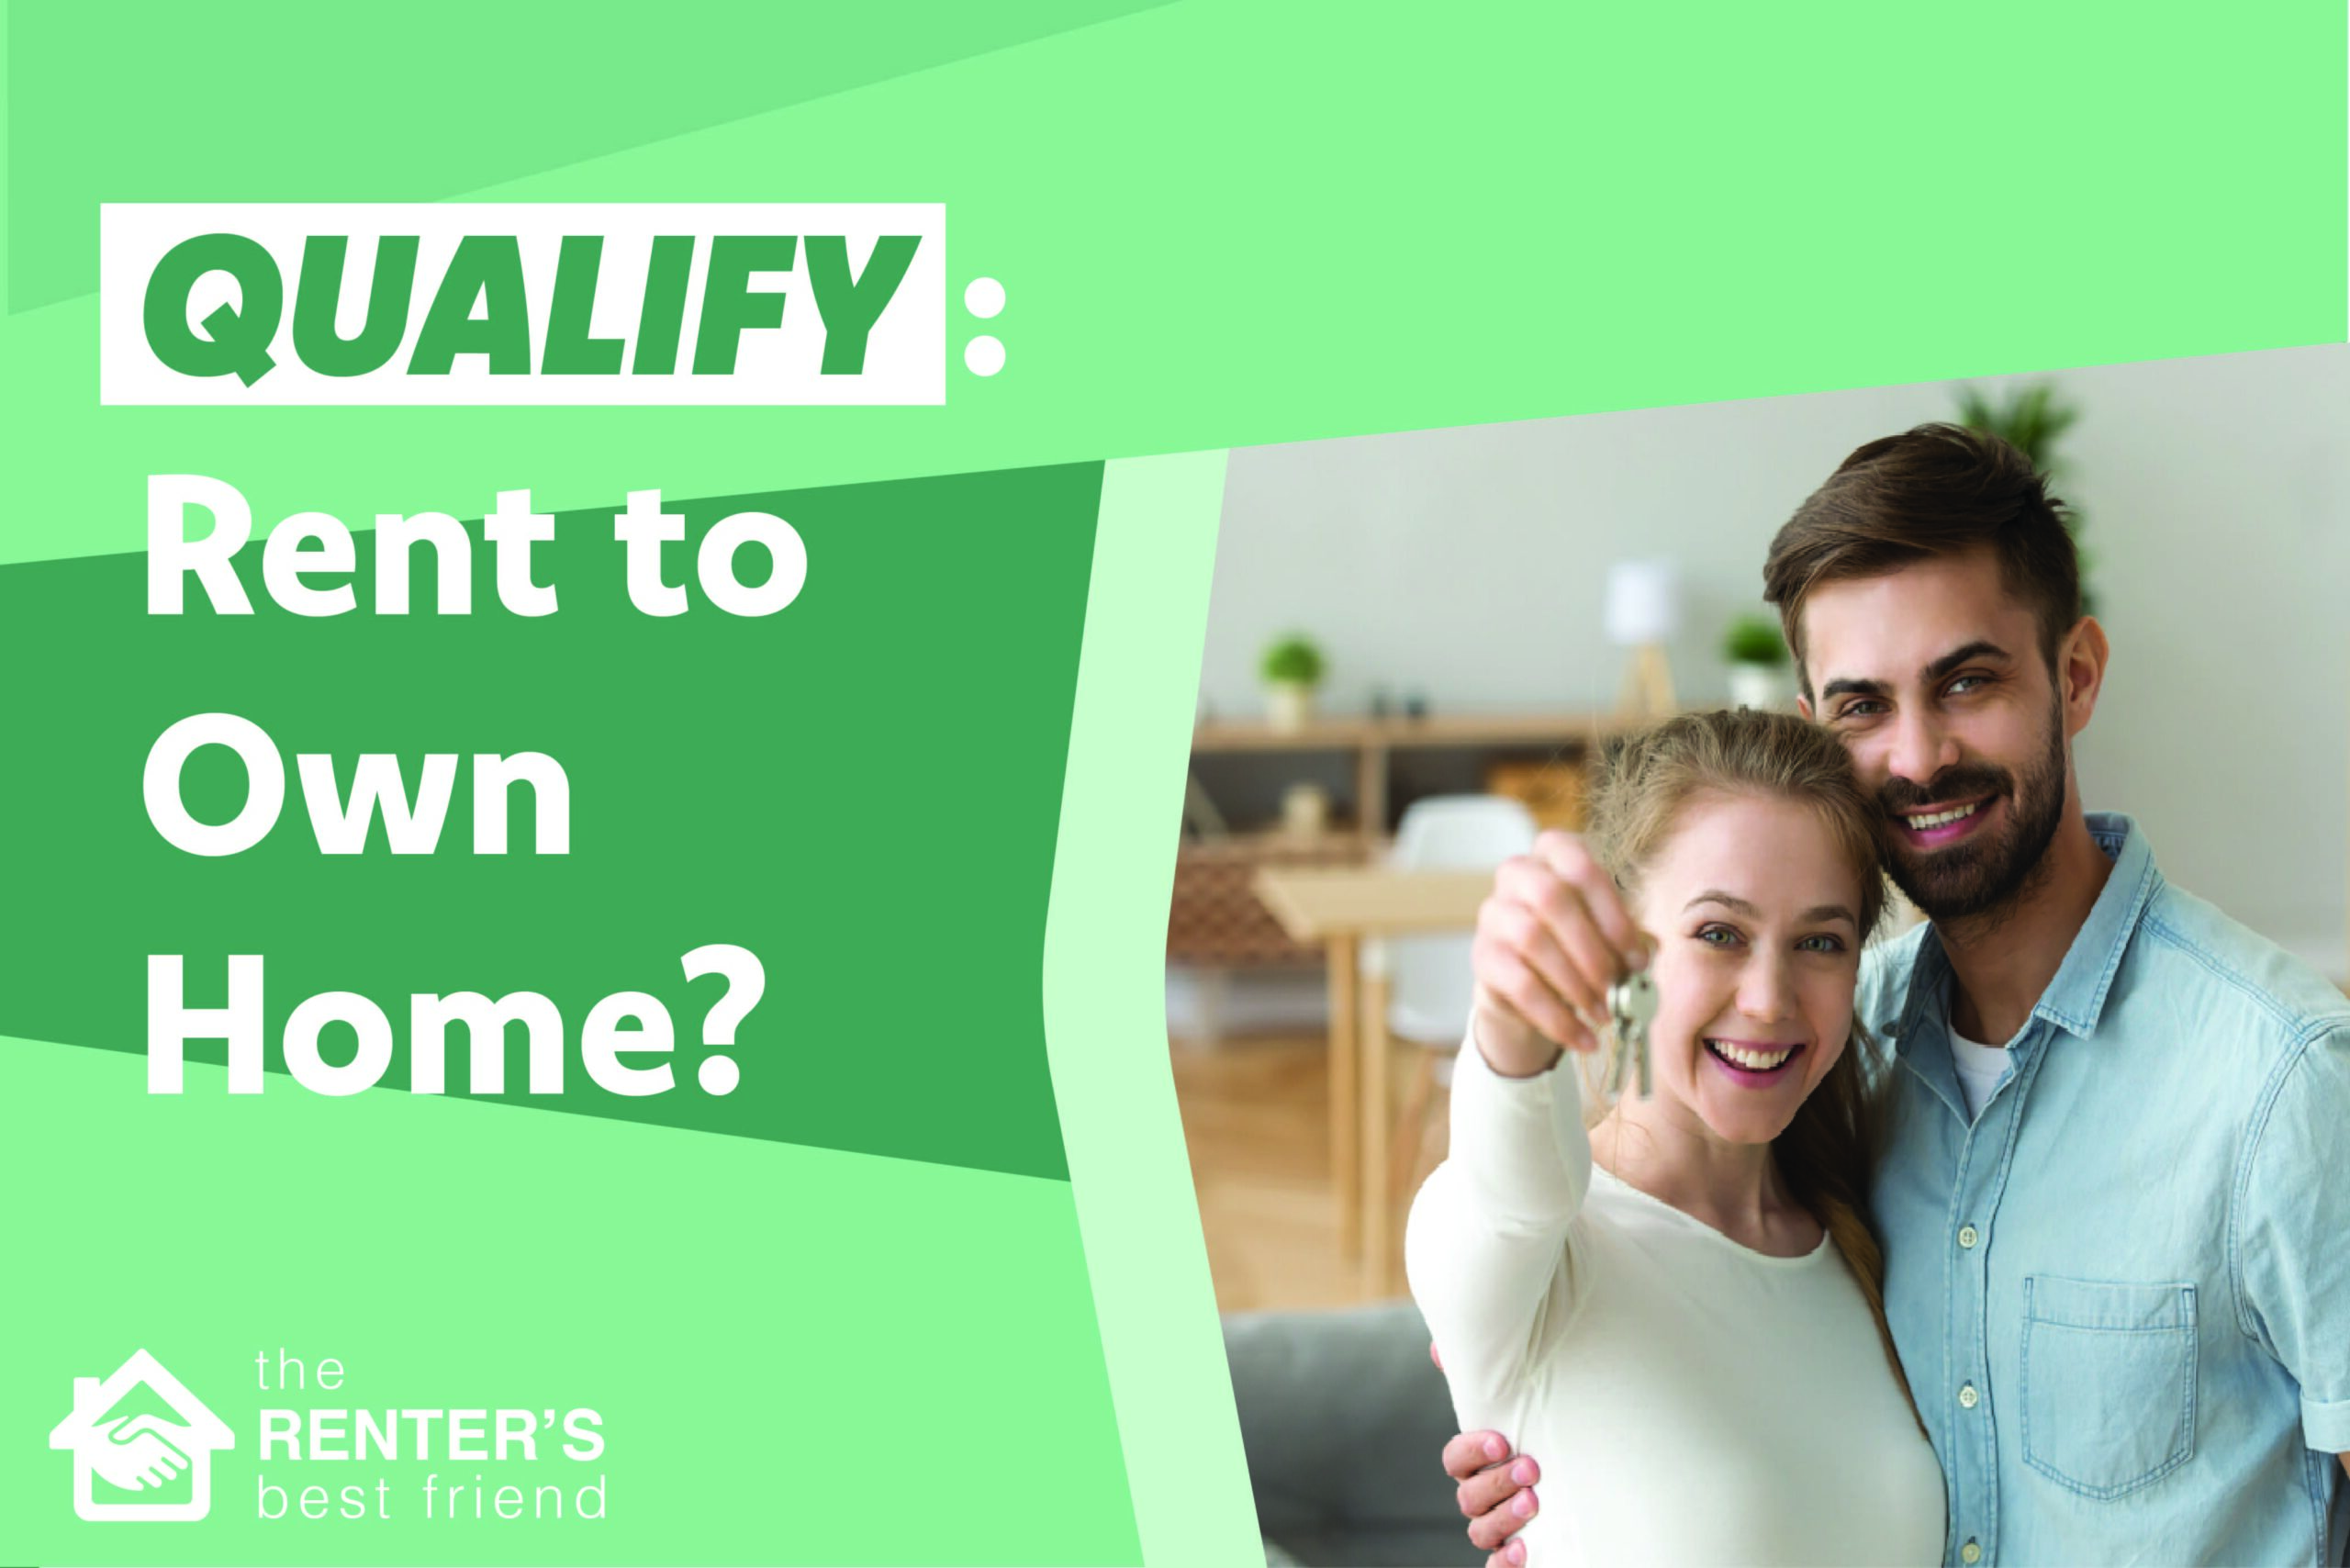 How to Qualify for a Rent to Own Home